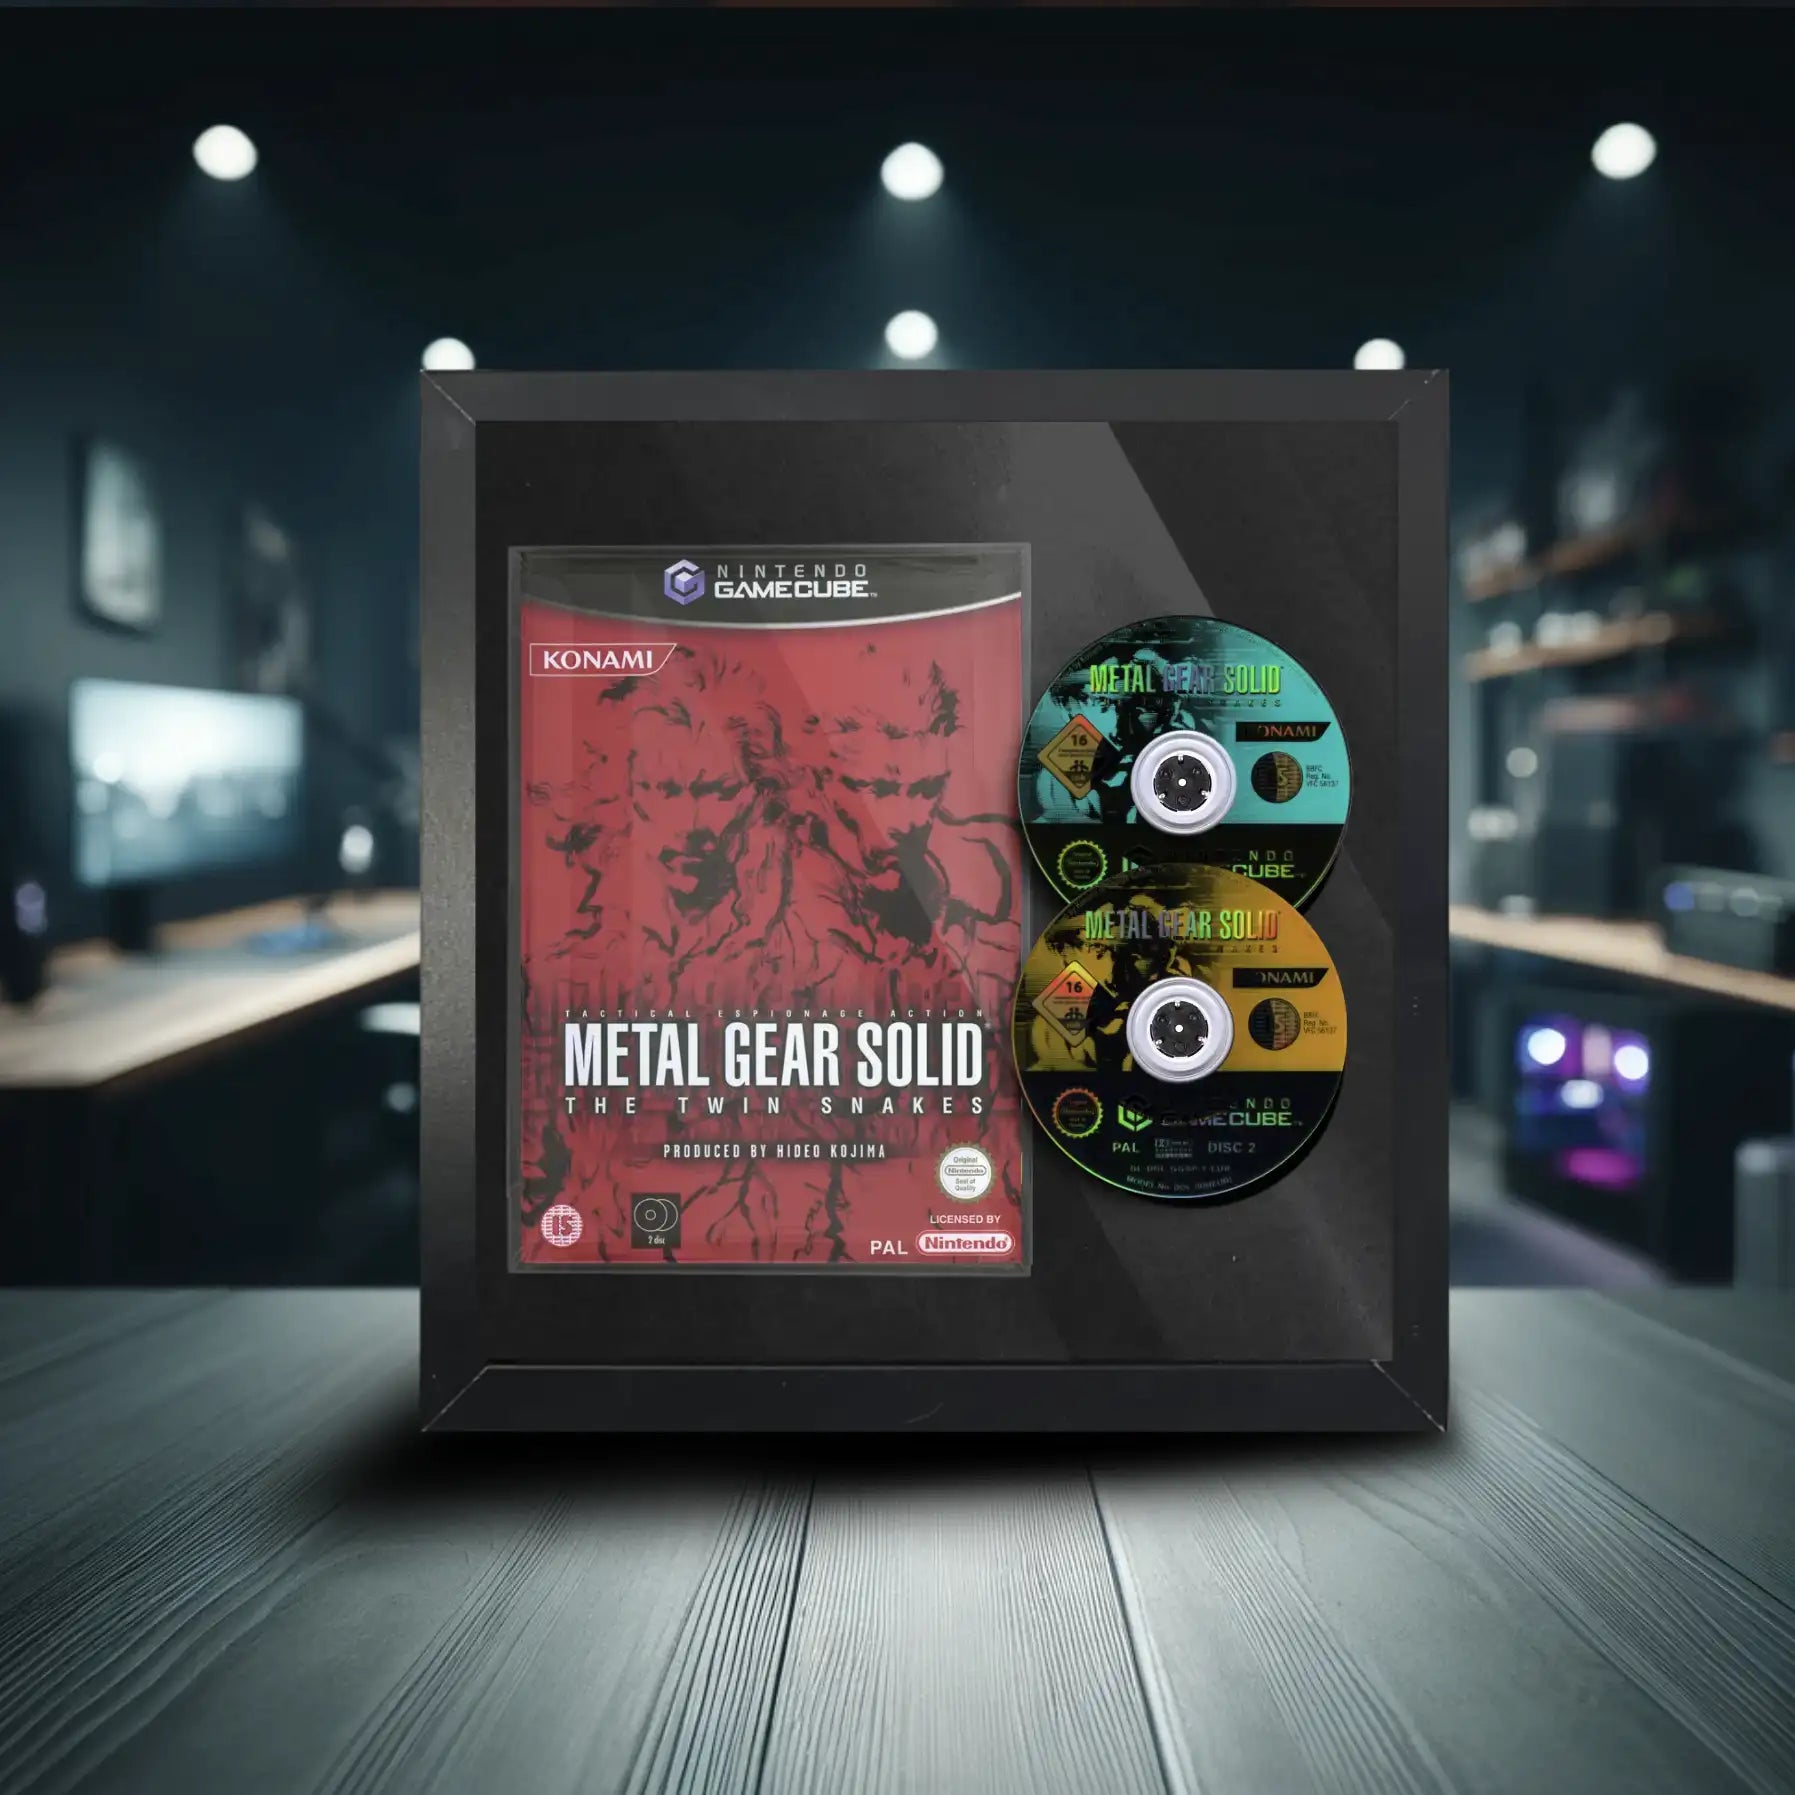 Metal gear solid gamecube video game inside a frame. This frame sits on a table inside a games room and displays the game disc and case